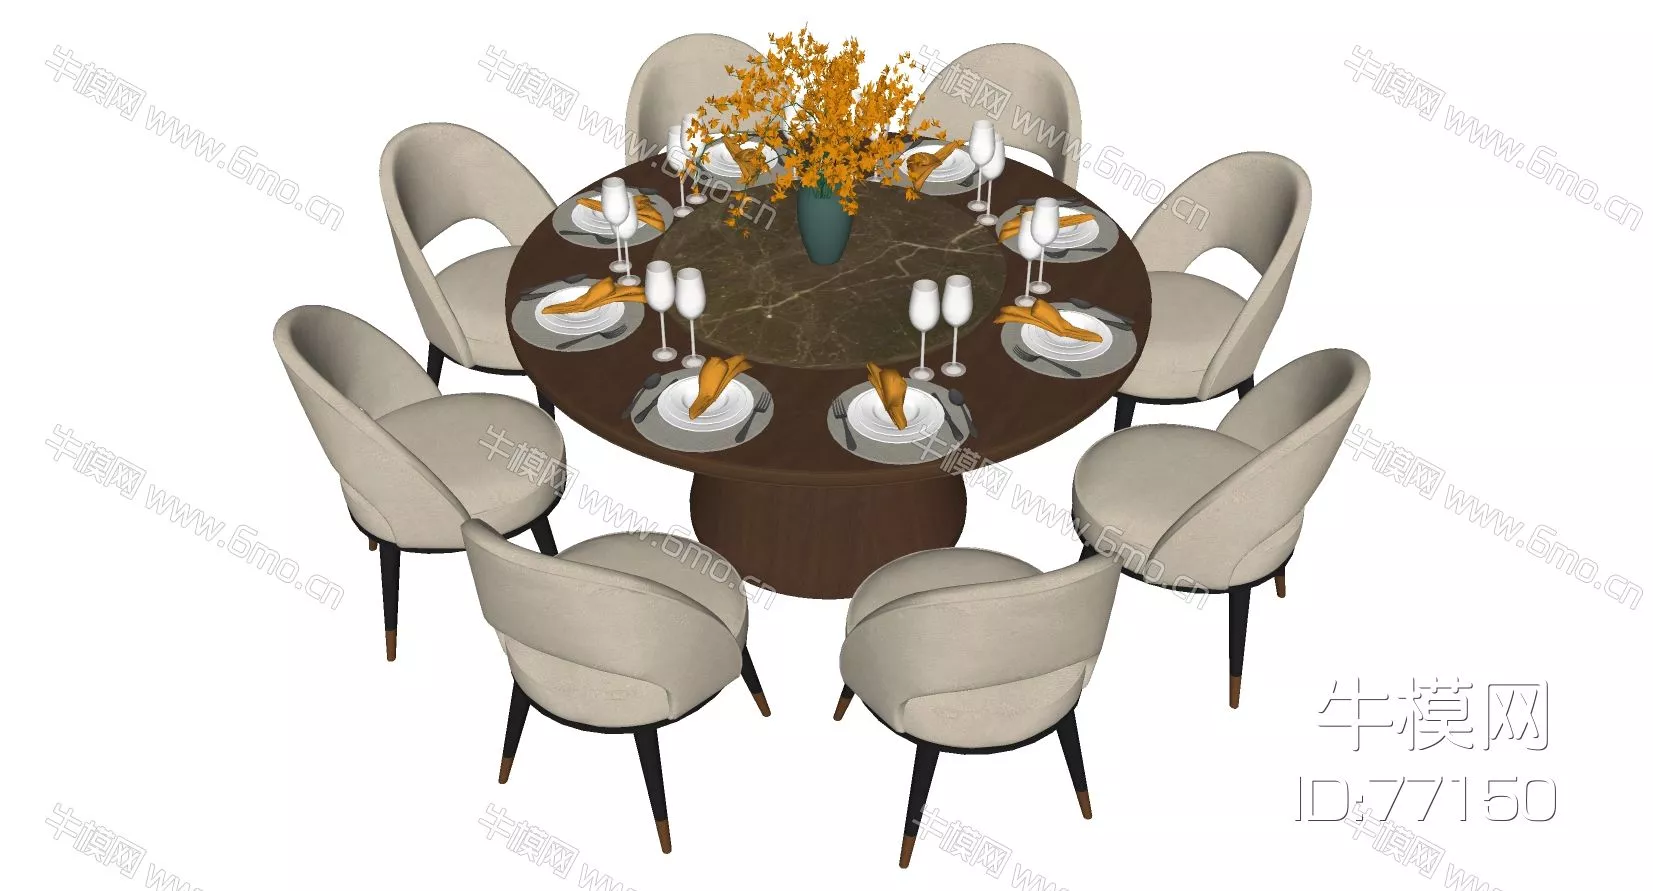 CHINESE DINING TABLE SET - SKETCHUP 3D MODEL - ENSCAPE - 77150